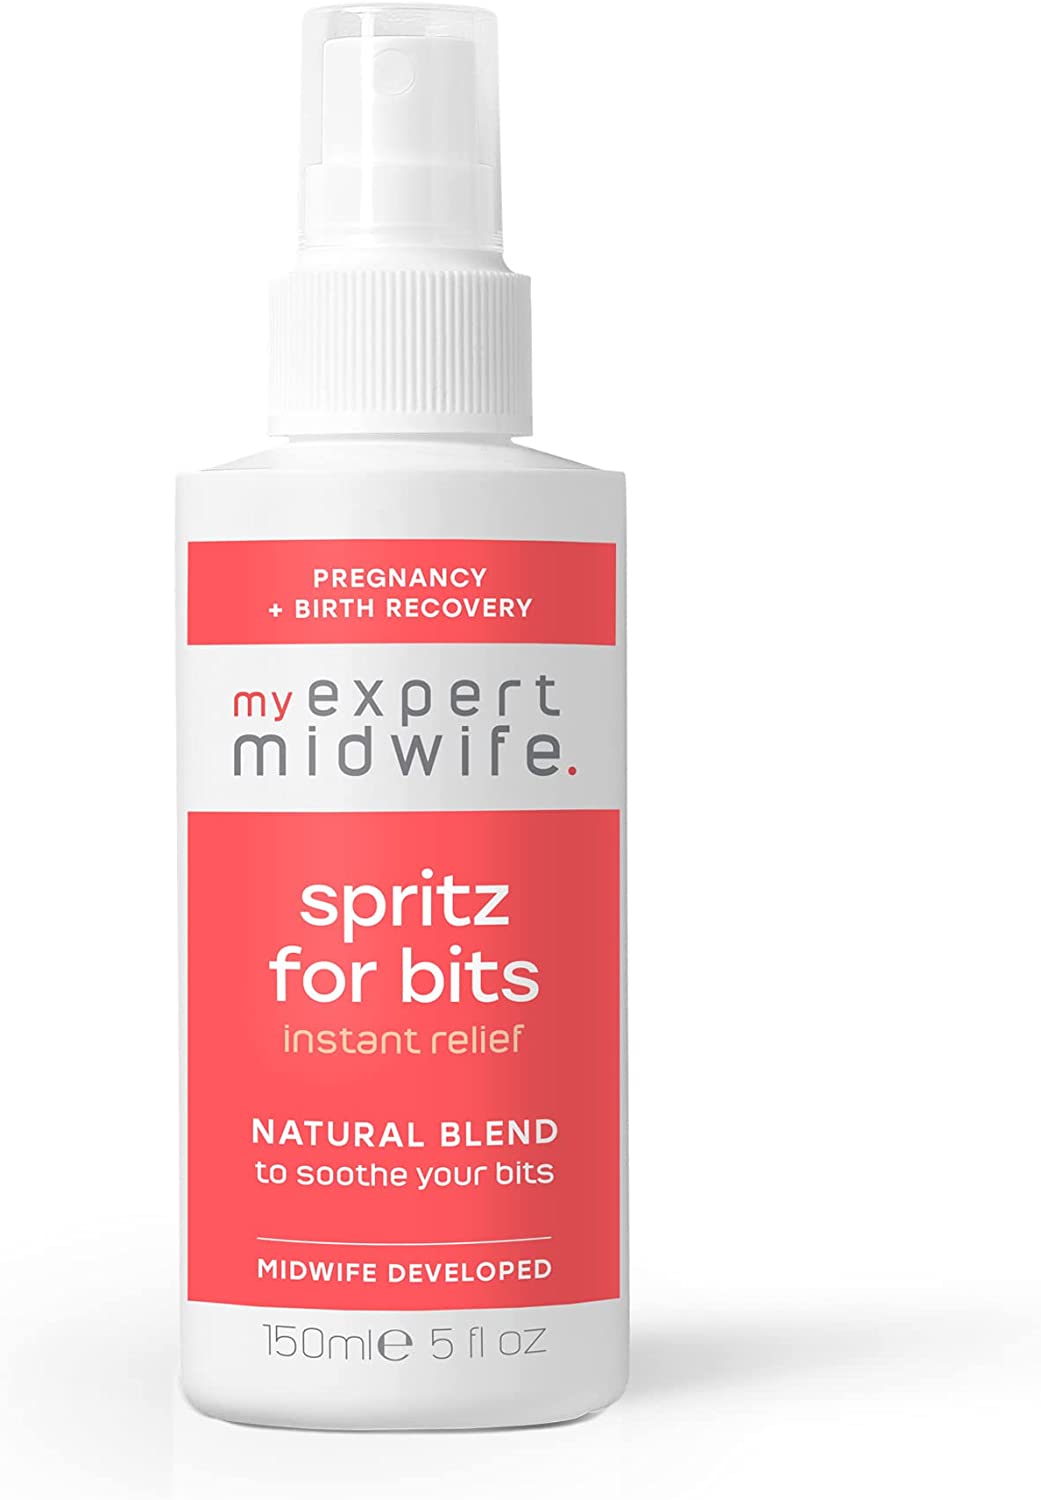 My Expert Midwife Spritz for Bits 150ml Image